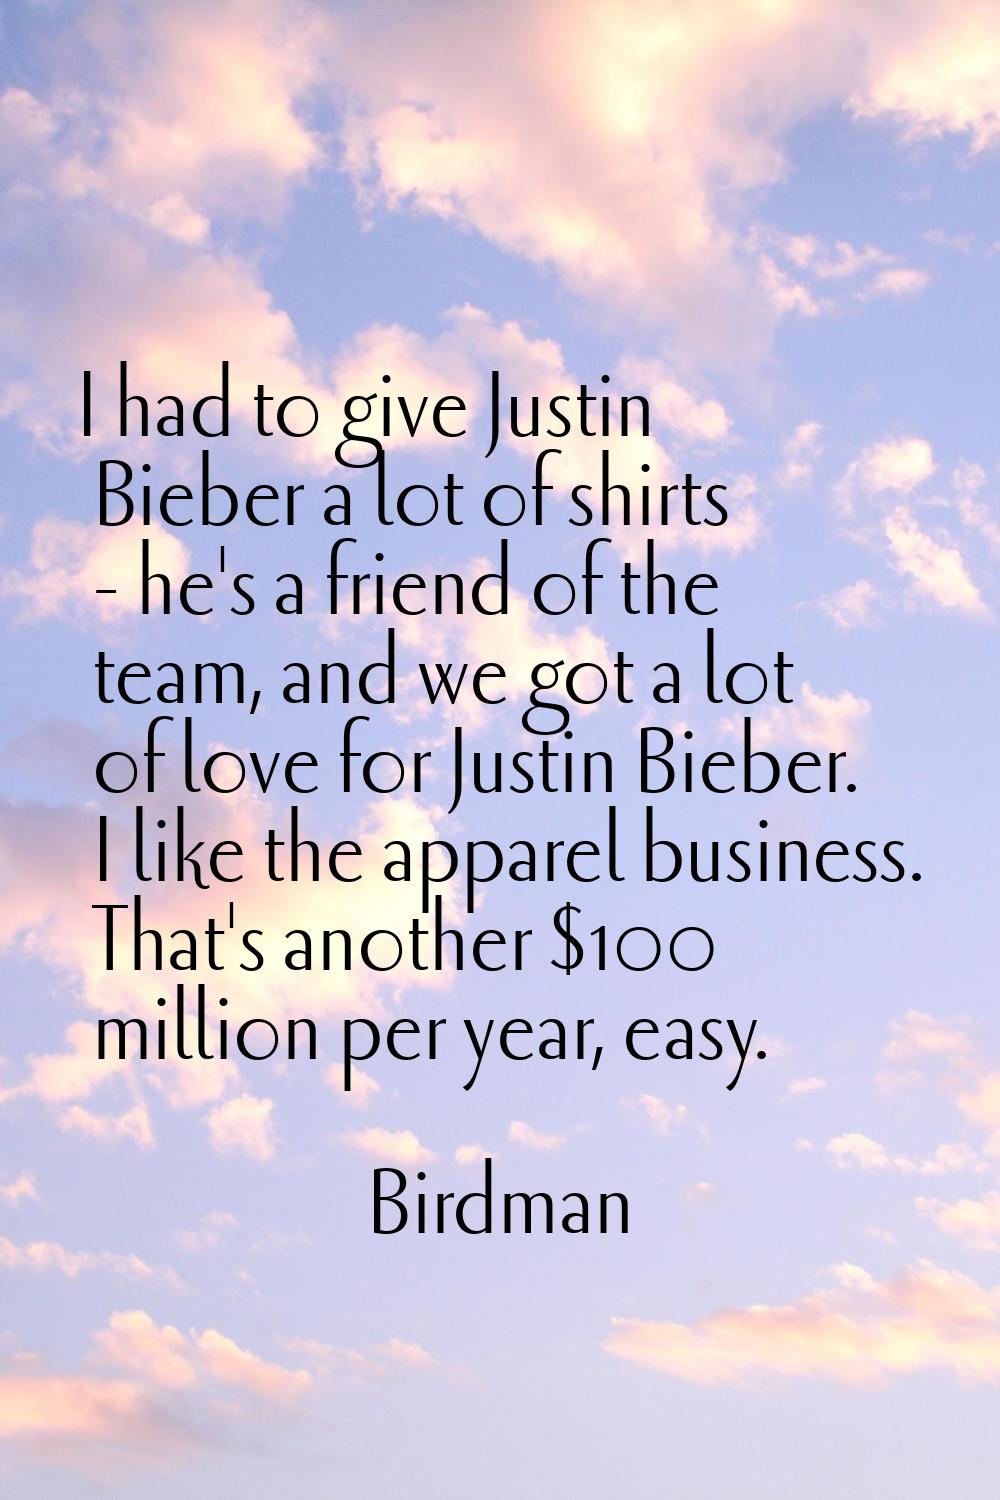 I had to give Justin Bieber a lot of shirts - he's a friend of the team, and we got a lot of love f